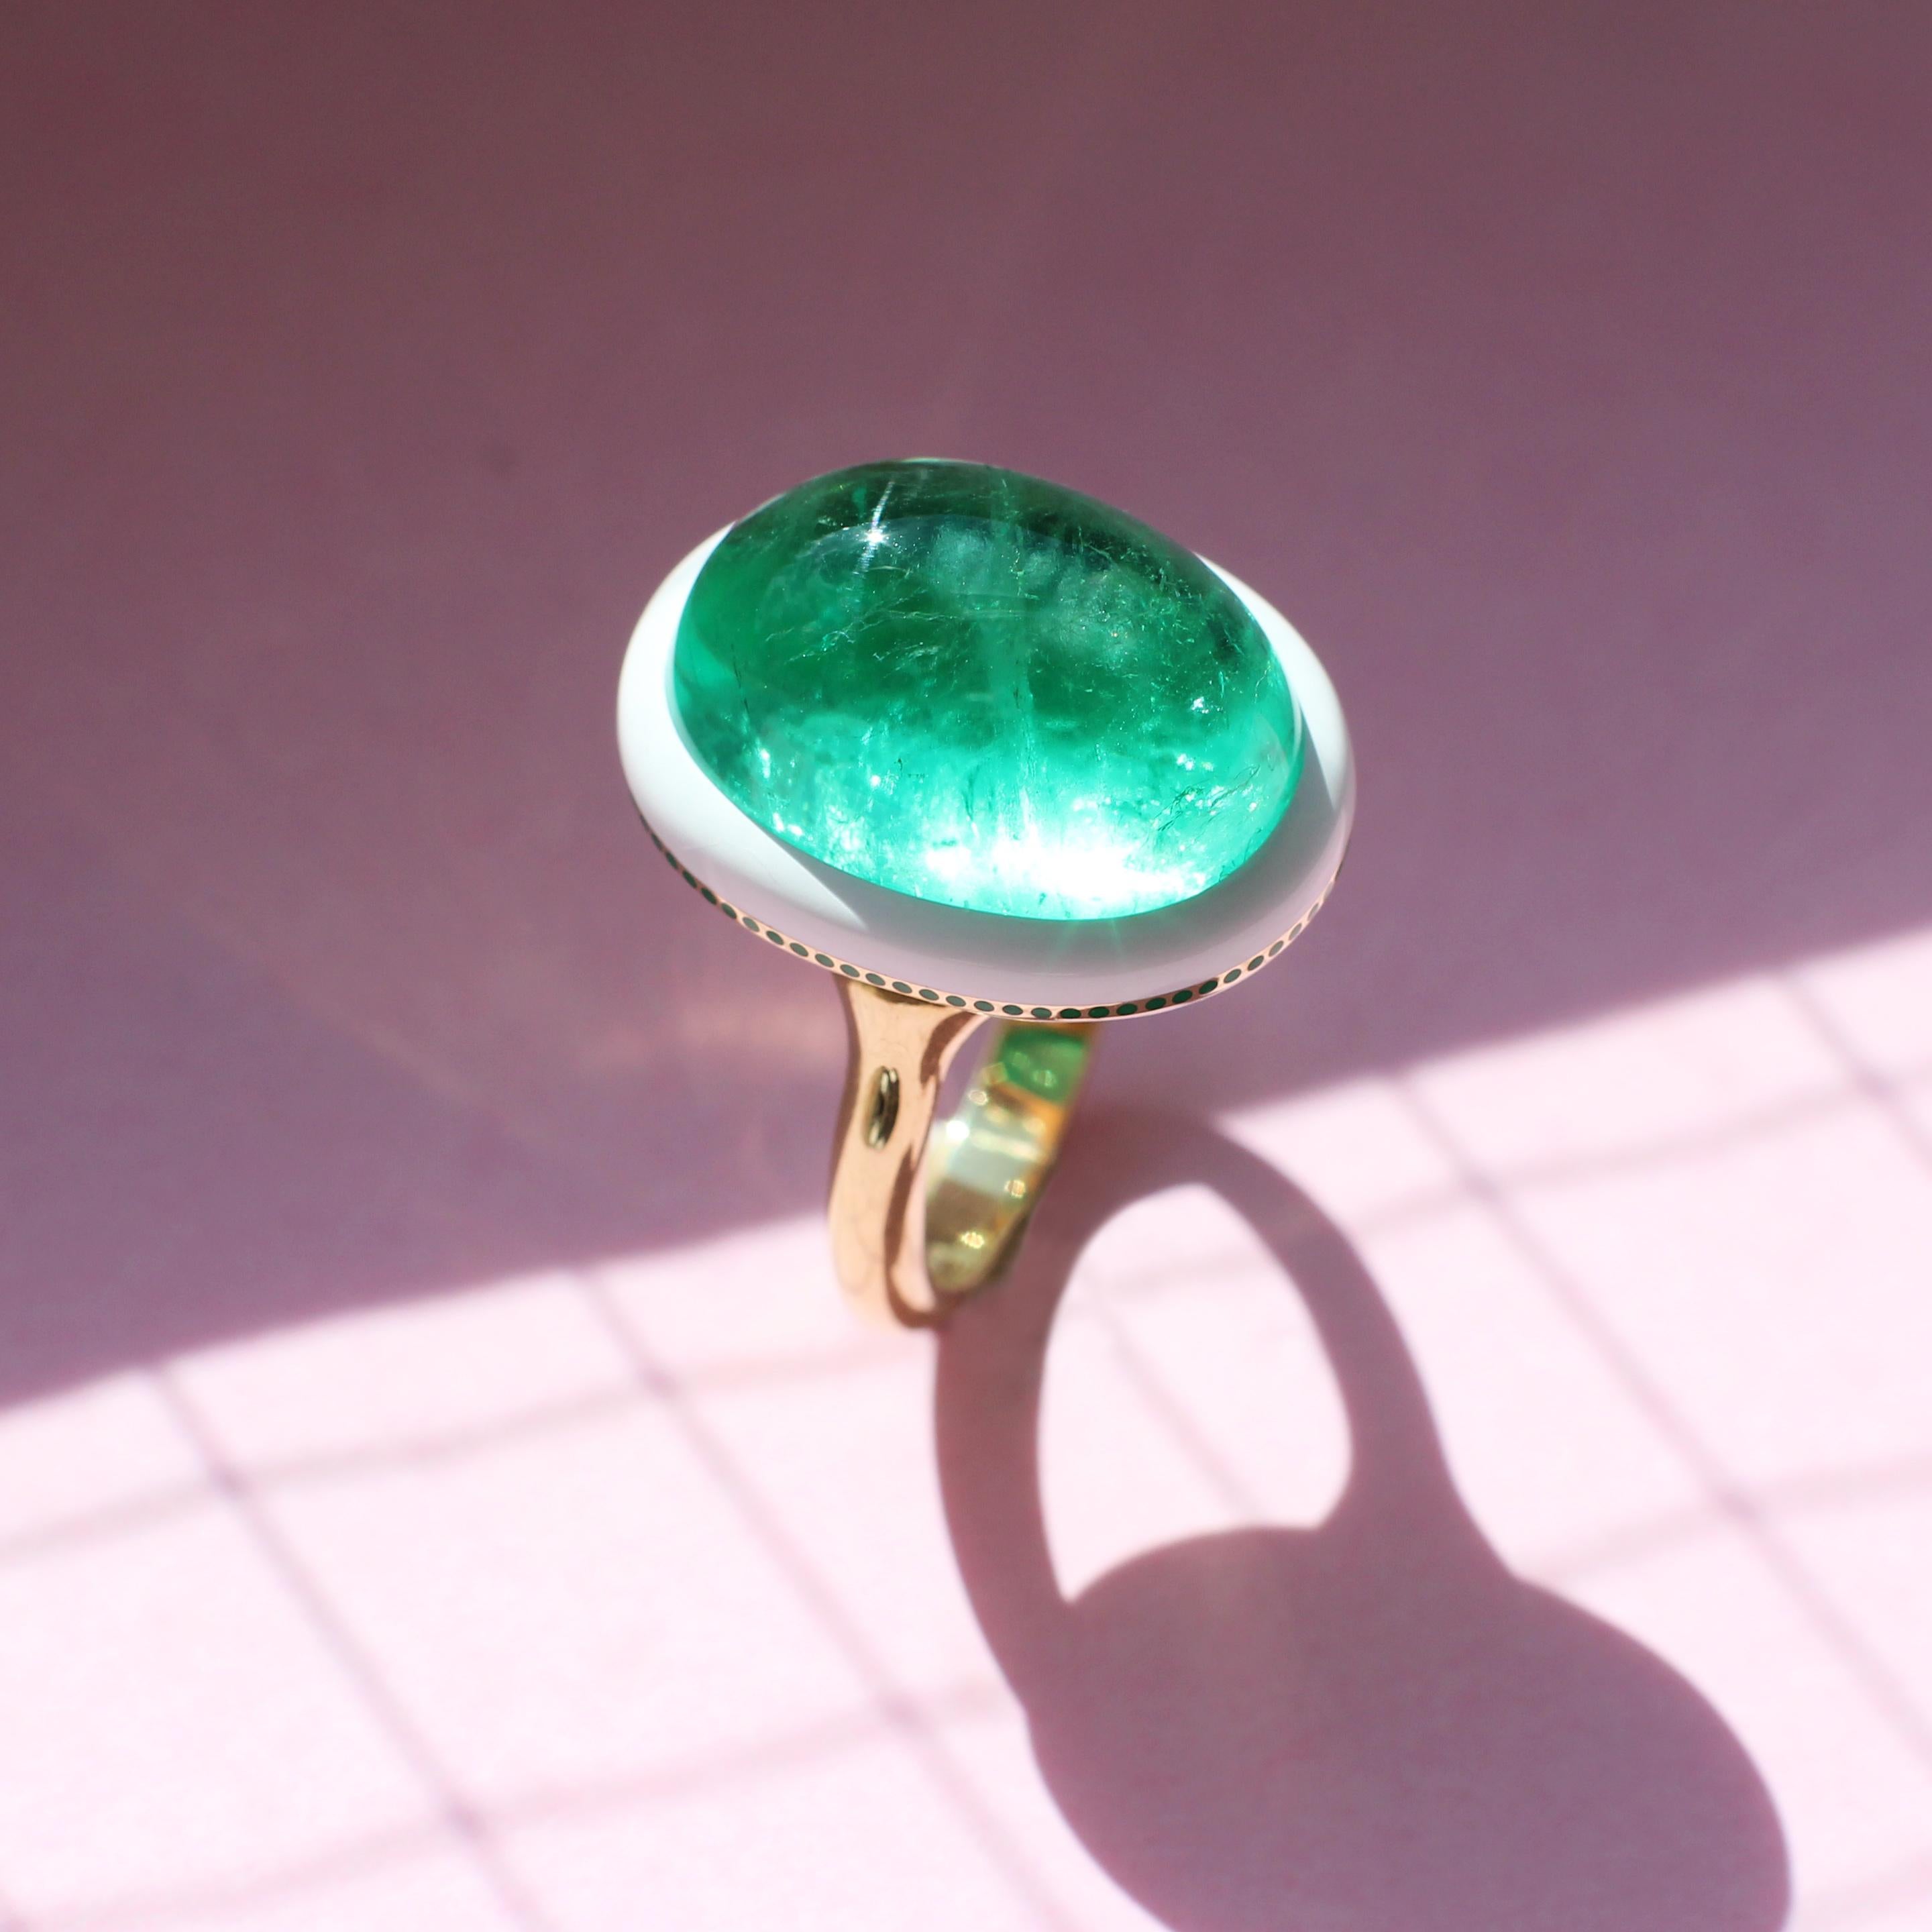 A ring for someone who likes things done differently, this yellow gold ring suits every occasion. Its spectacular cabochon emerald was rescued from an outdated ring and now forms a smooth, oval centrepiece atop a white ceramic surround. Tiny green